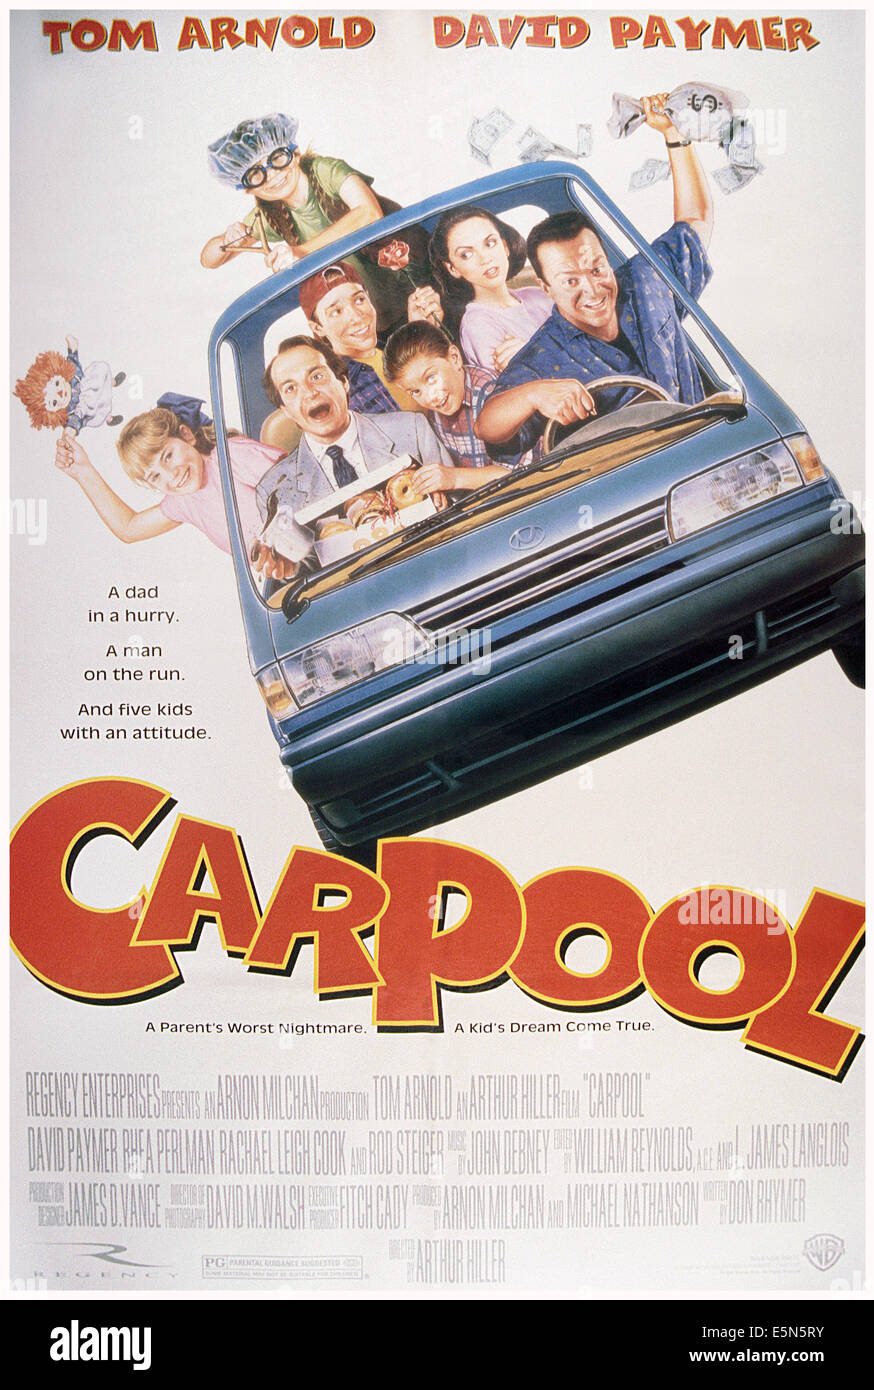 CARPOOL, front from left: Colleen Rennison (head out window), David Paymer, Mikey Kovar, Tom Arnold, back seat from left: Micah Stock Photo